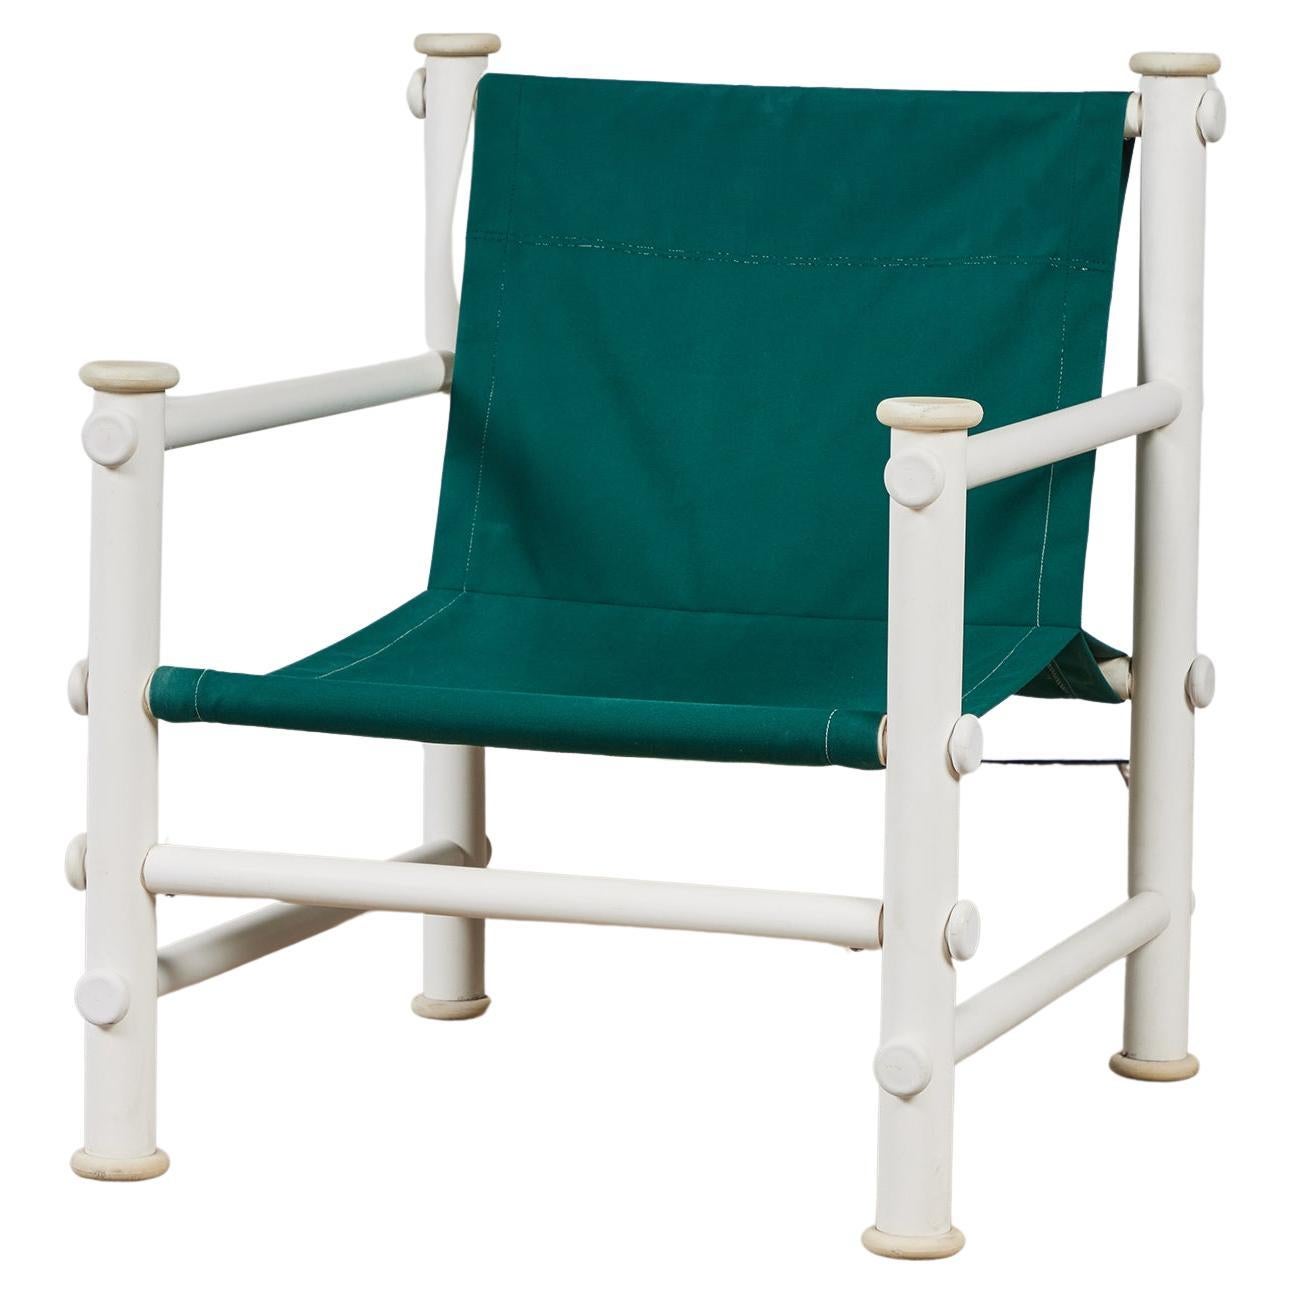 Jerry Johnson Outdoor-Sessel "Idyllwild" Sling Lounge Chair